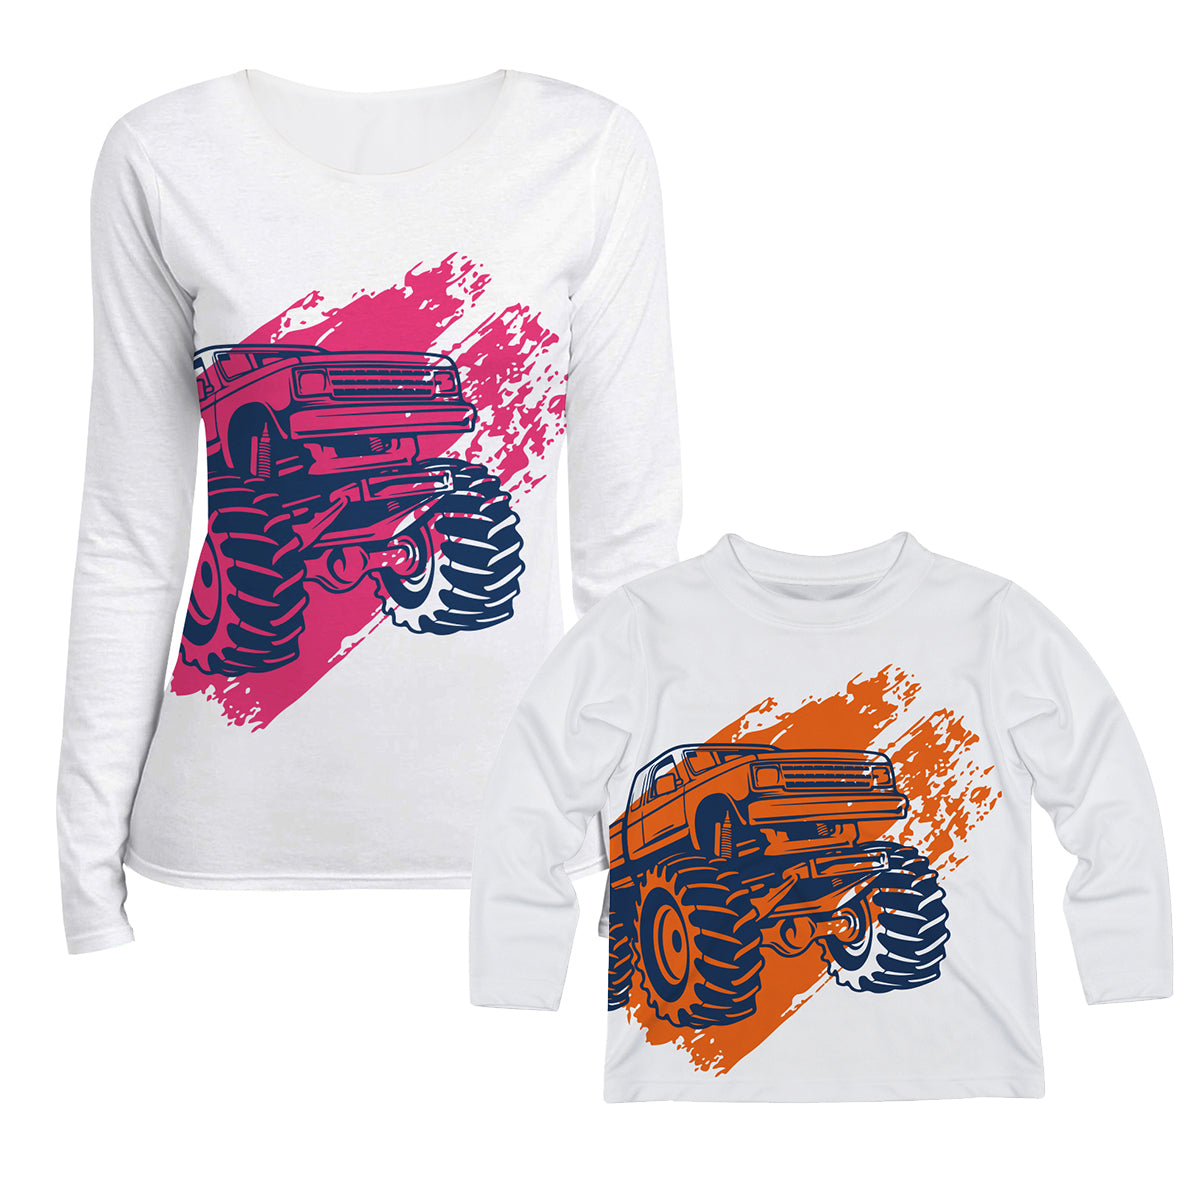 Monster Truck White and Pink Long Sleeve Tee Shirt - Wimziy&Co.